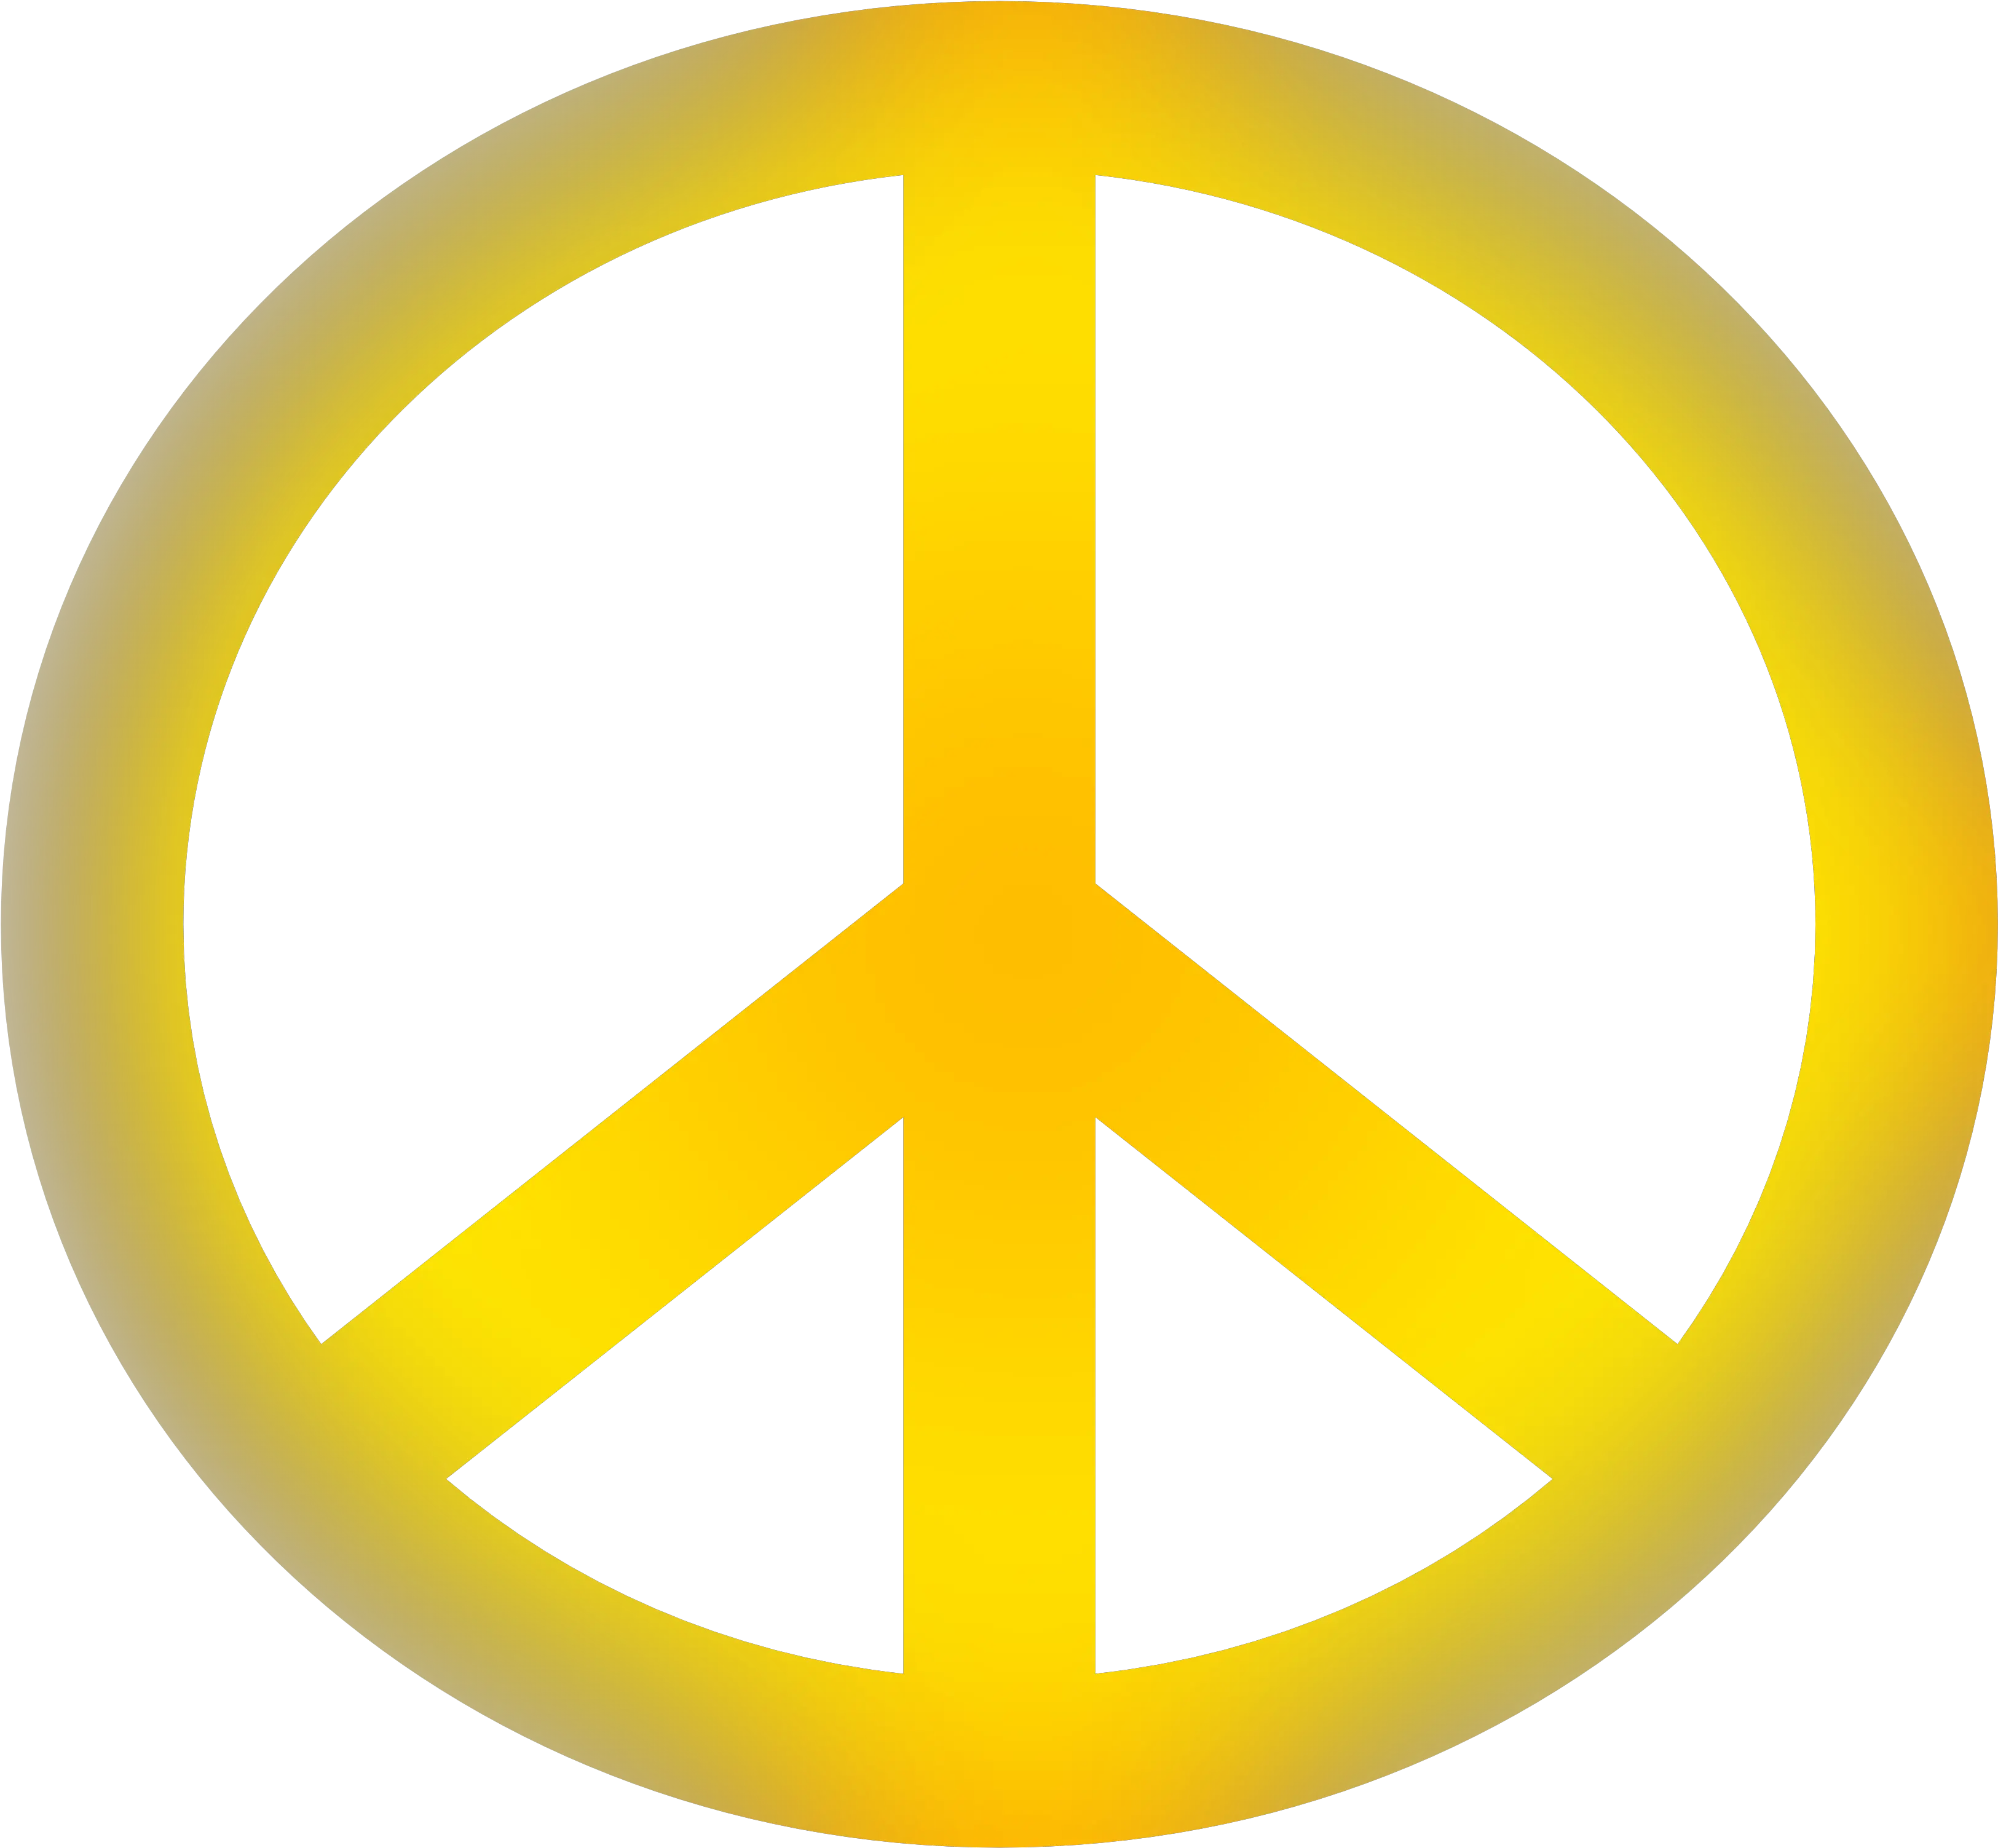 Peace Symbol Png Transparent Images 5 3333 X 3304 Symbols With Different Meanings Symbols Png